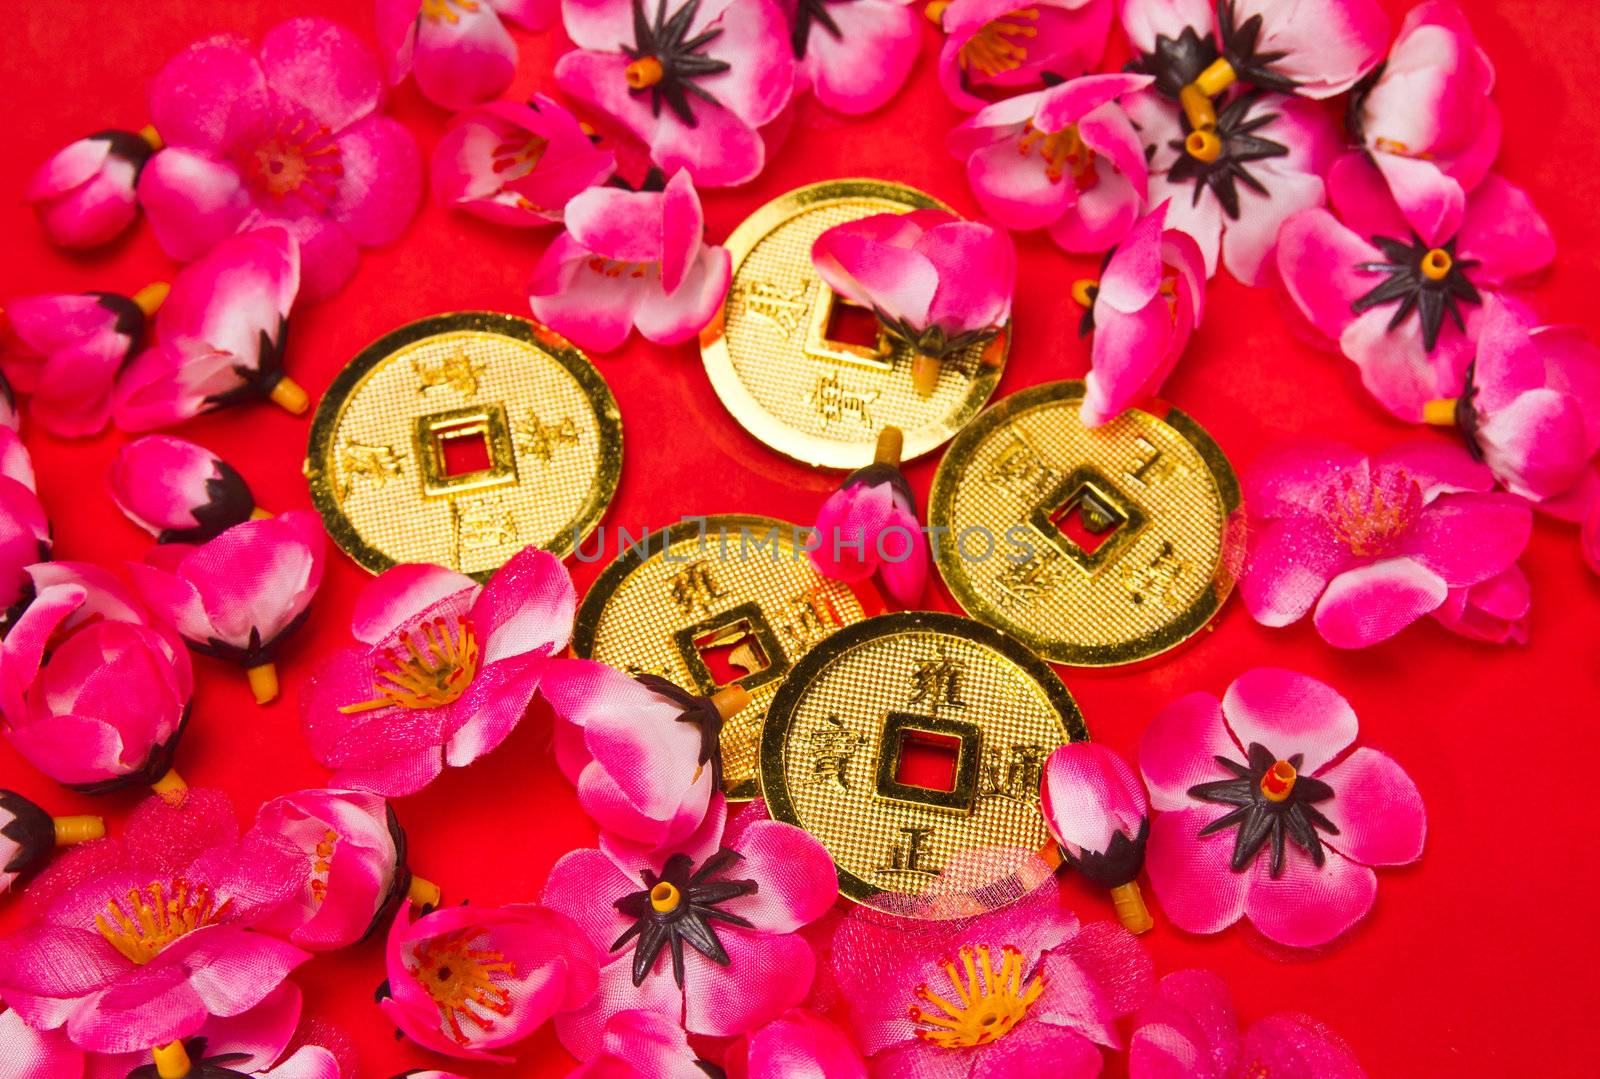 Golden coins ornaments with plastic cherry blossoms on red surface for CNY celebration